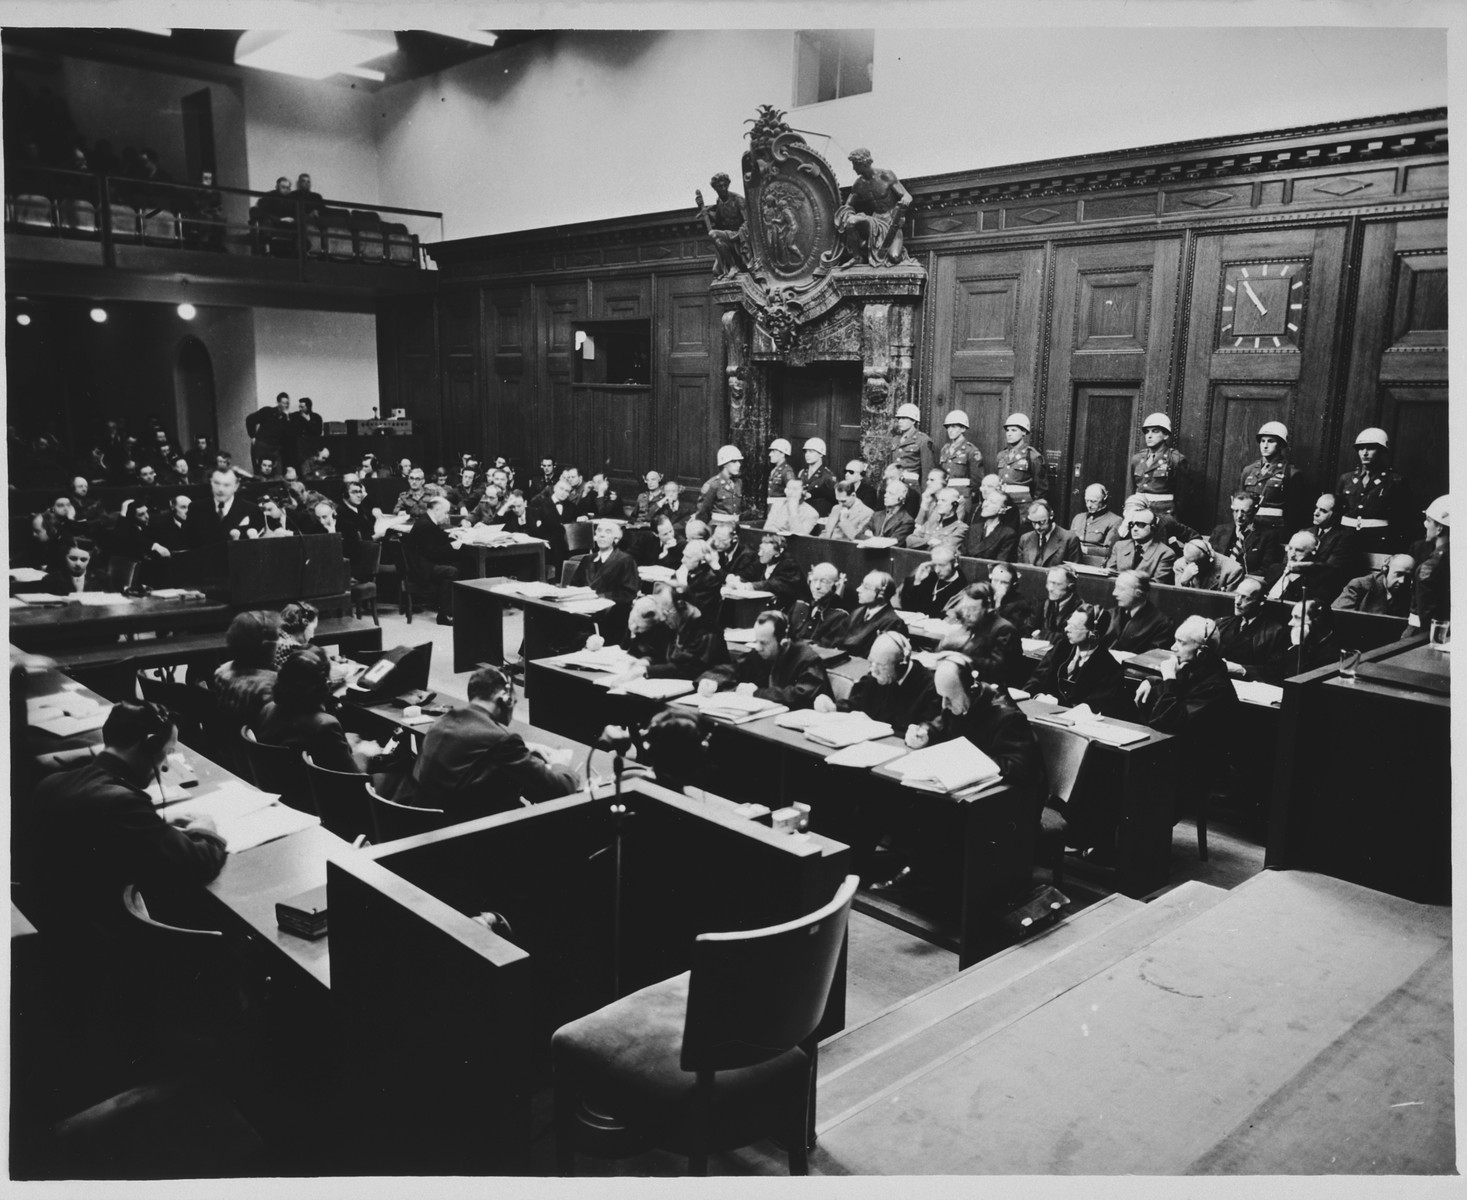 View of the courtroom during a session of the International Military Tribunal trial of war criminals at Nuremberg.

In the foreground is the witness chair.  In the background at the left, Justice Robert Jackson delivers his opening address.